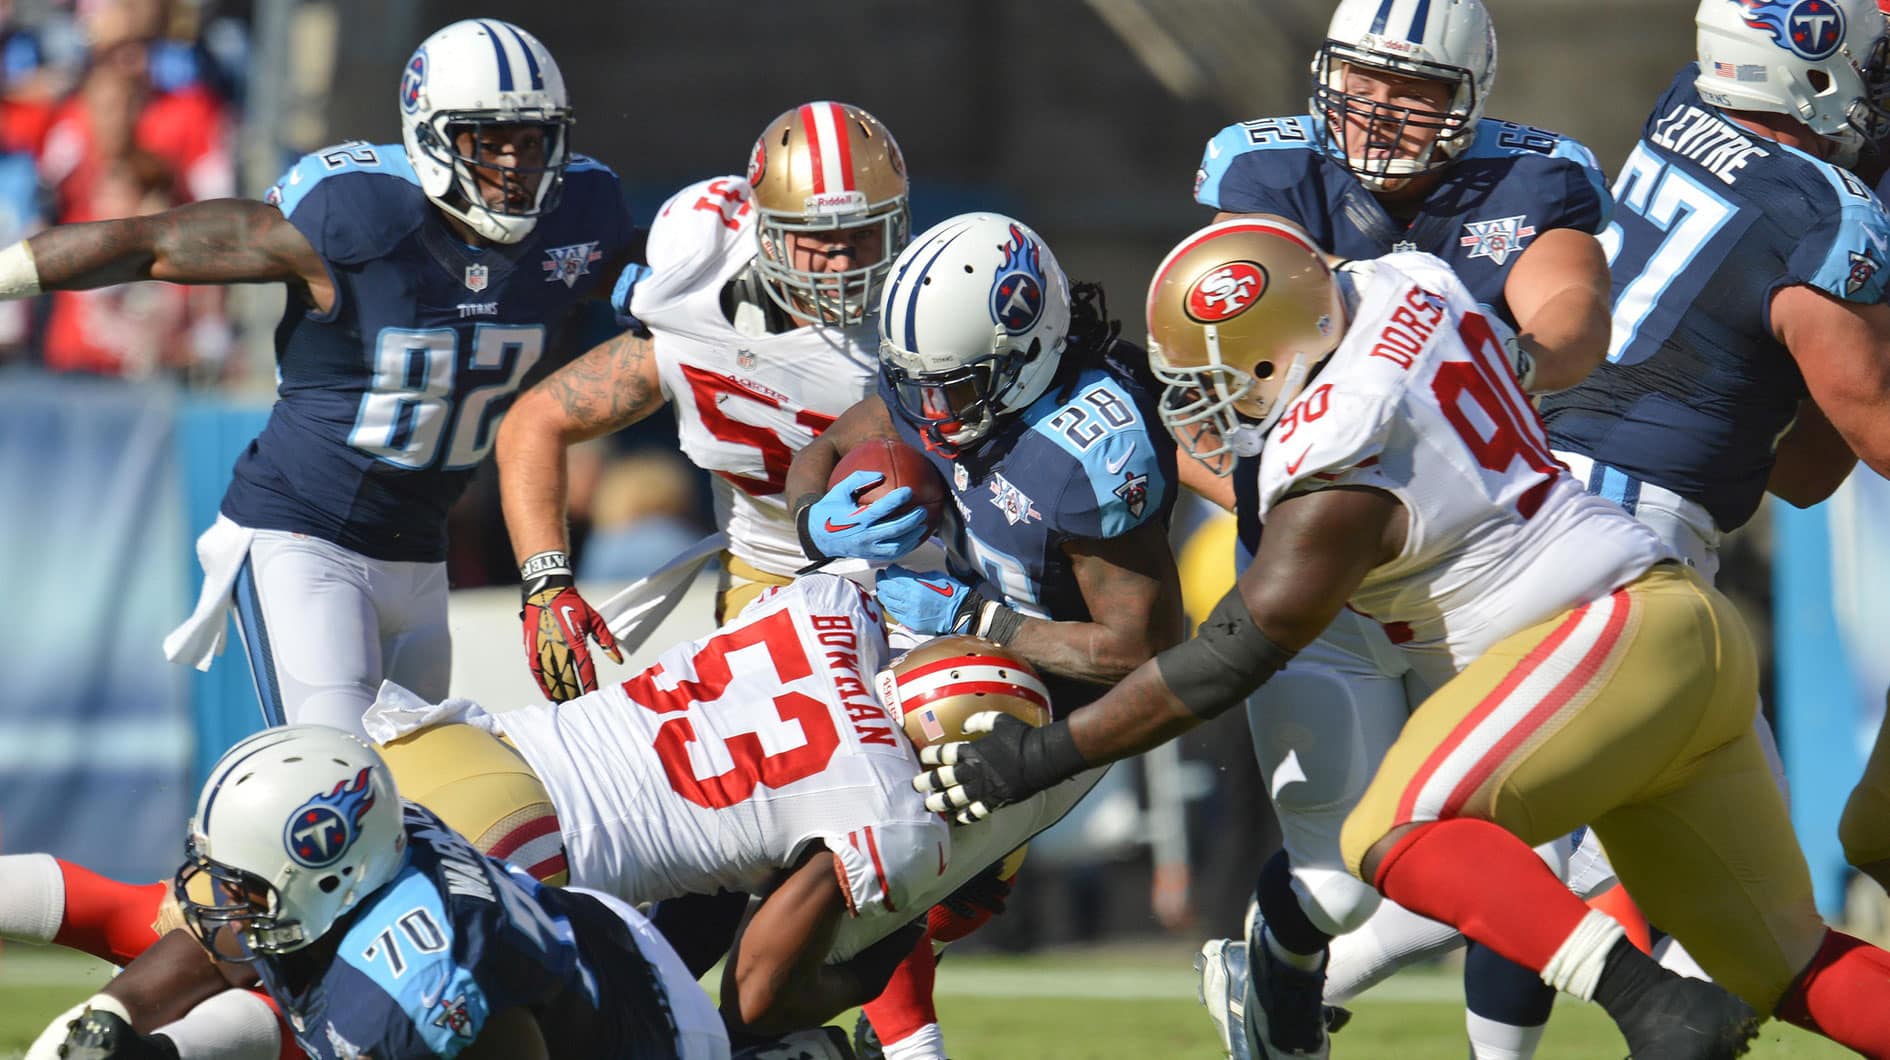 Tennessee Titans running back Chris Johnson (28) is tackled by San Francisco 49ers linebacker NaVarro Bowman (53) during the first half at LP Field. 